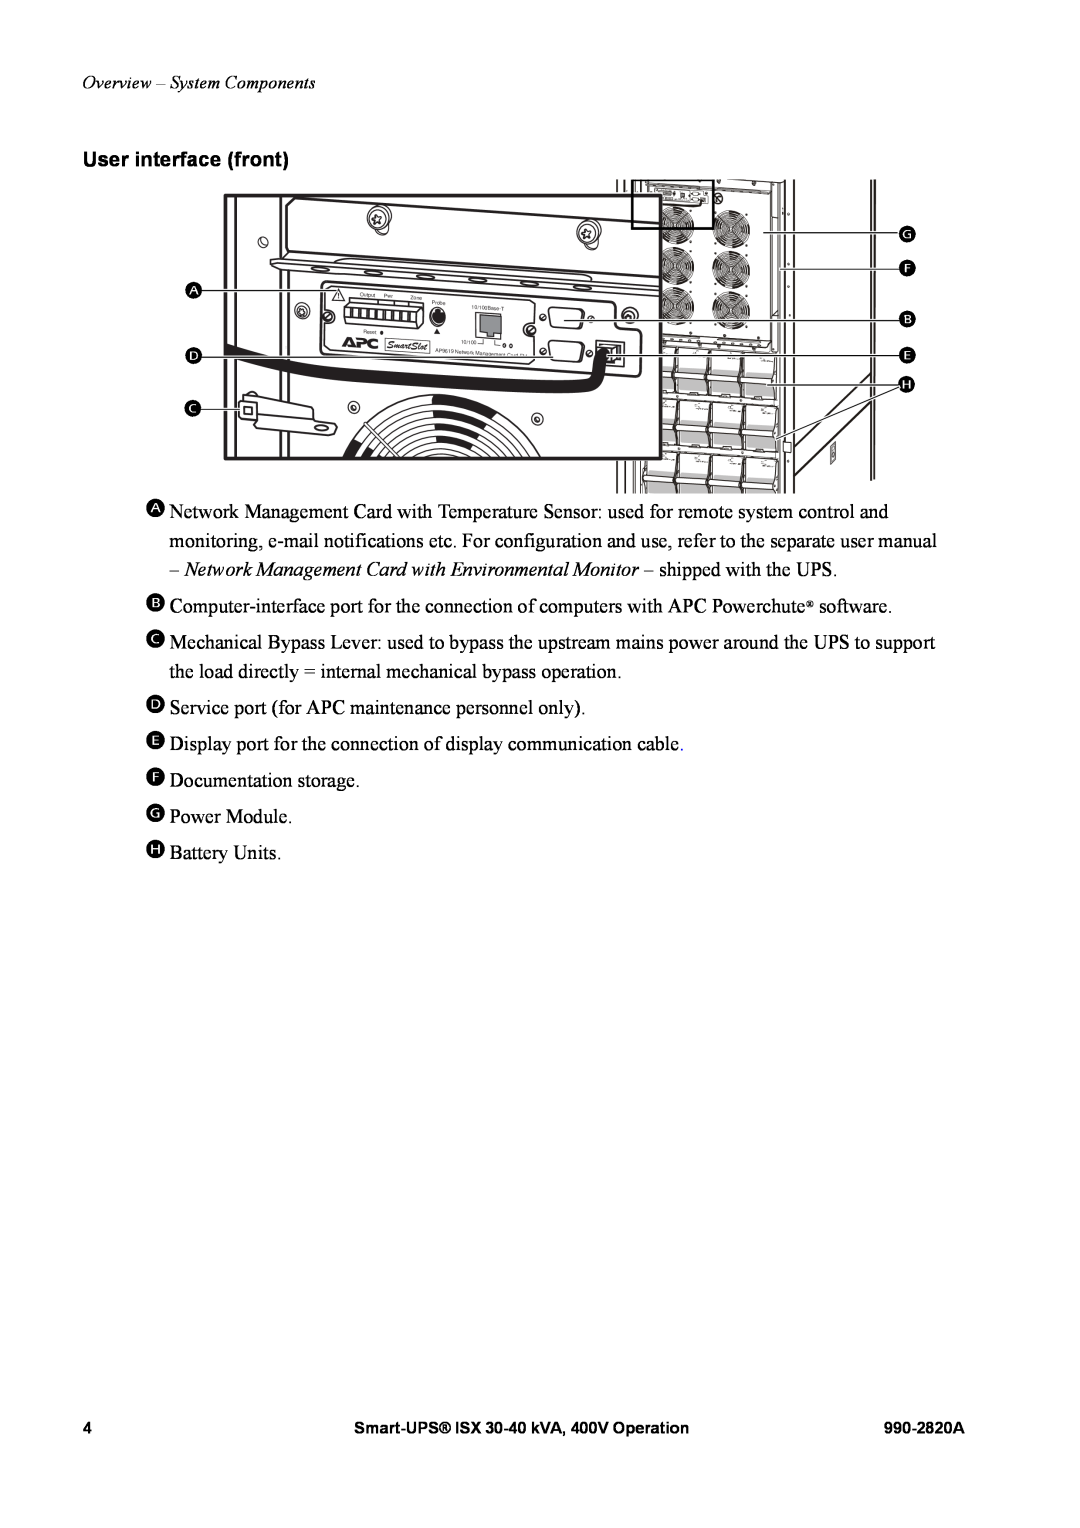 American Power Conversion VT ISX manual User interface front 